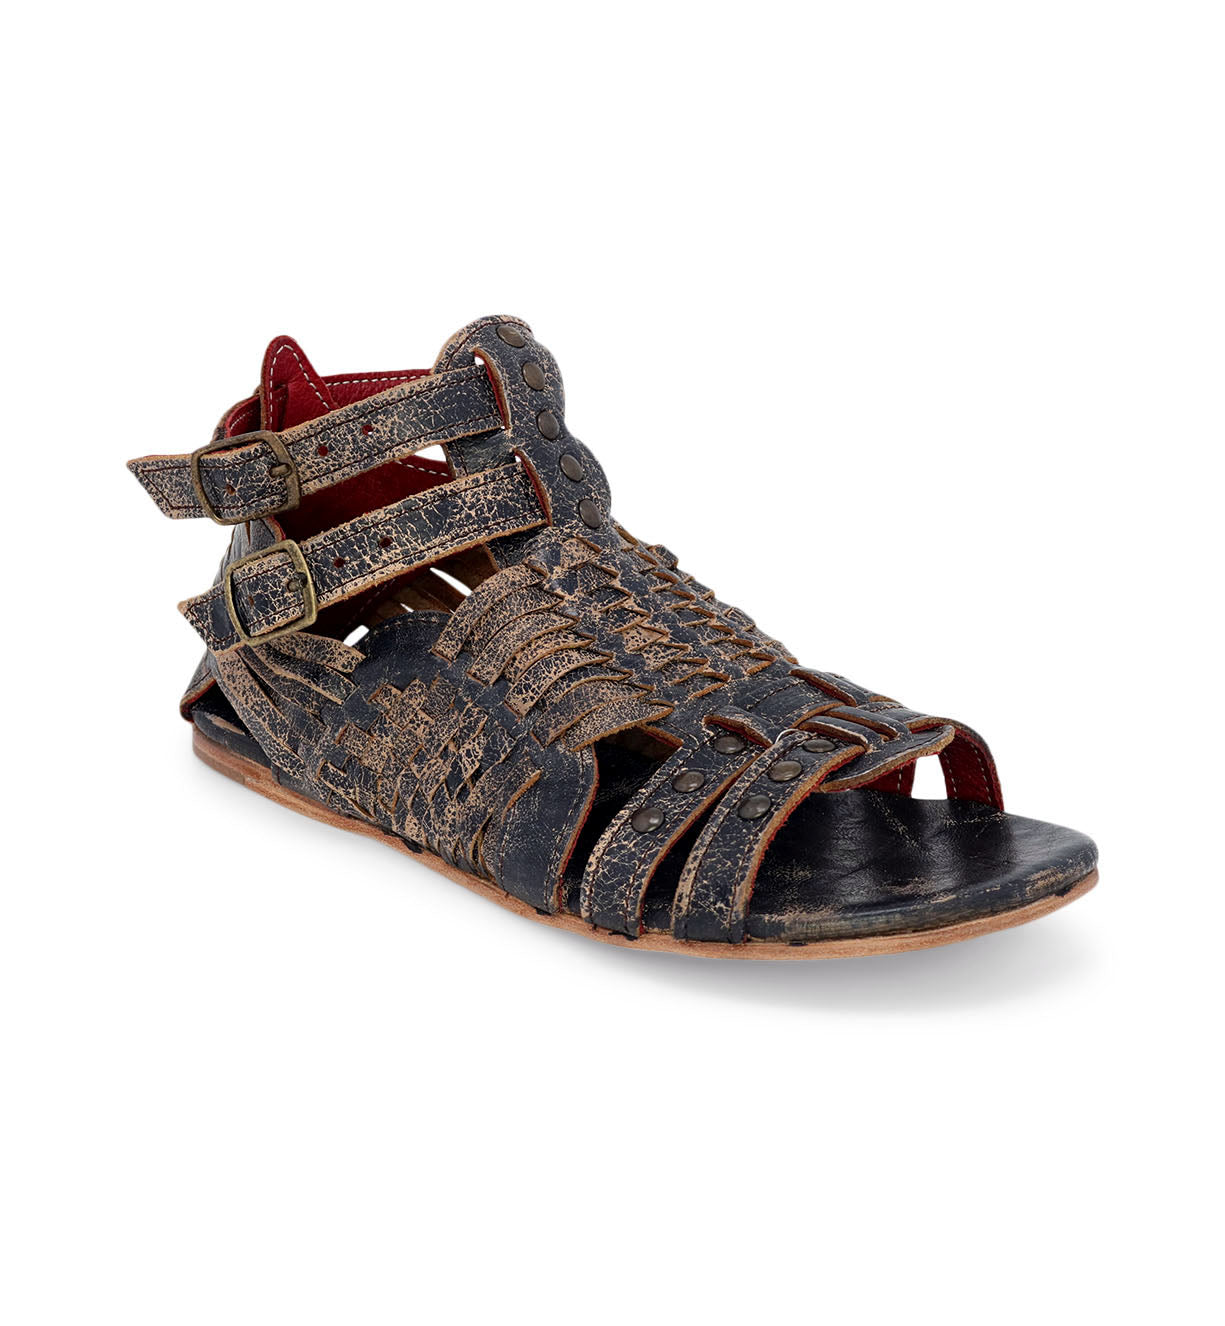 Men's Claire gladiator sandals with straps and buckles by Bed Stu.